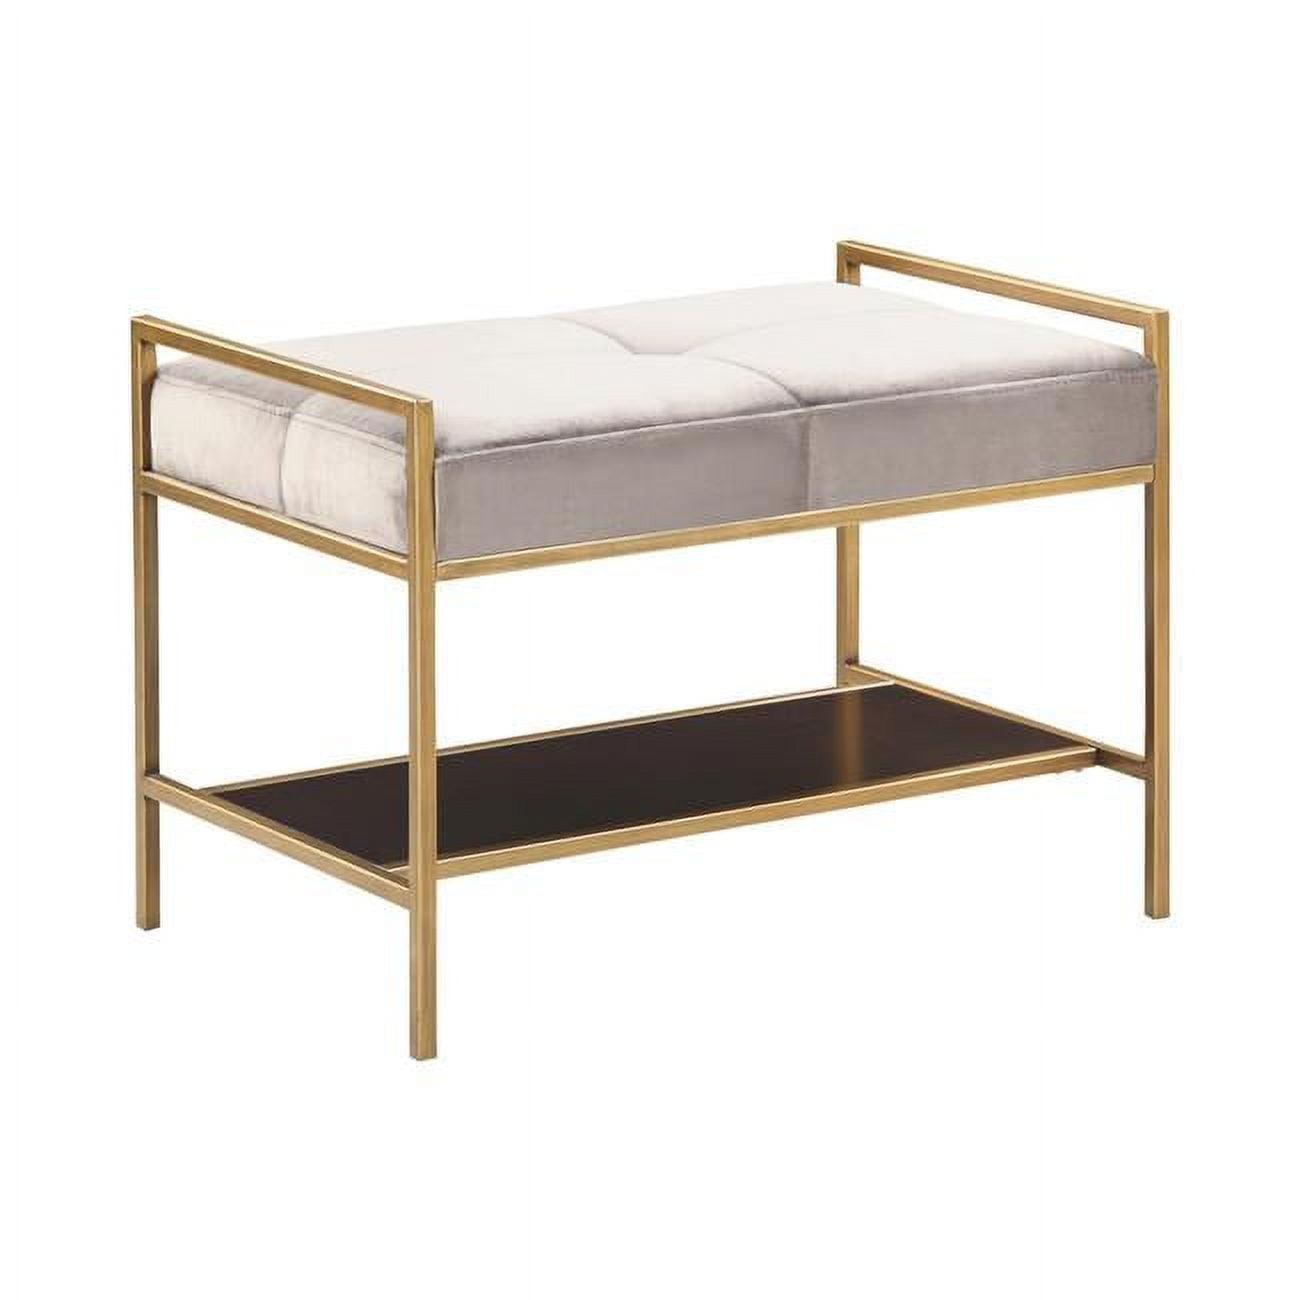 Gold Tone Metal Frame Bench with Gray Velvet Tufted Seat